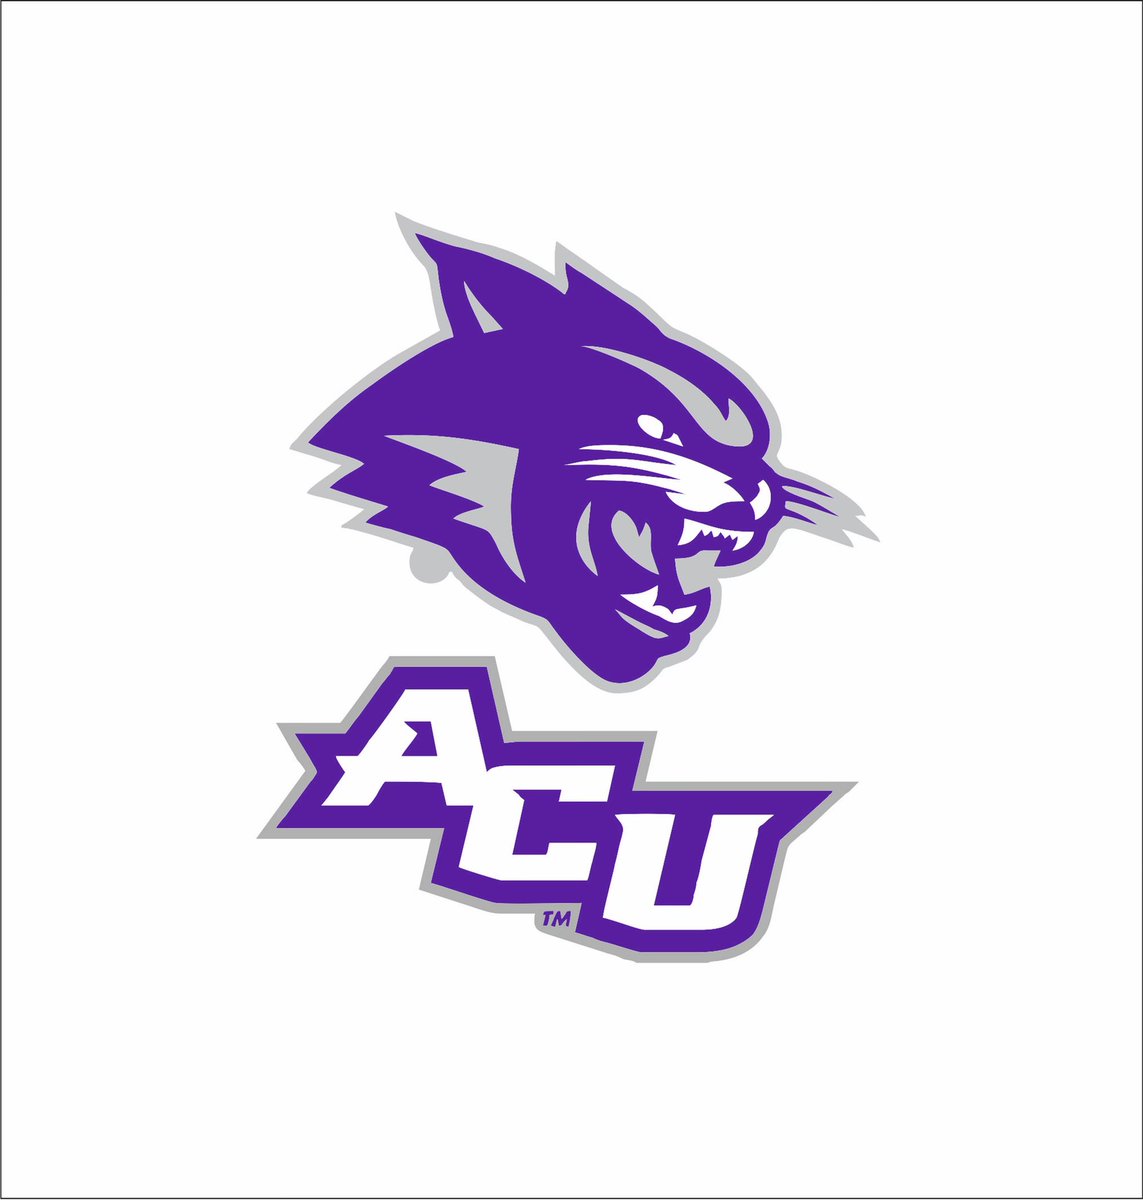 Truly blessed to revive an offer from @ACUFootball @coachscarter @Josh_Scoop @coachkennedy7